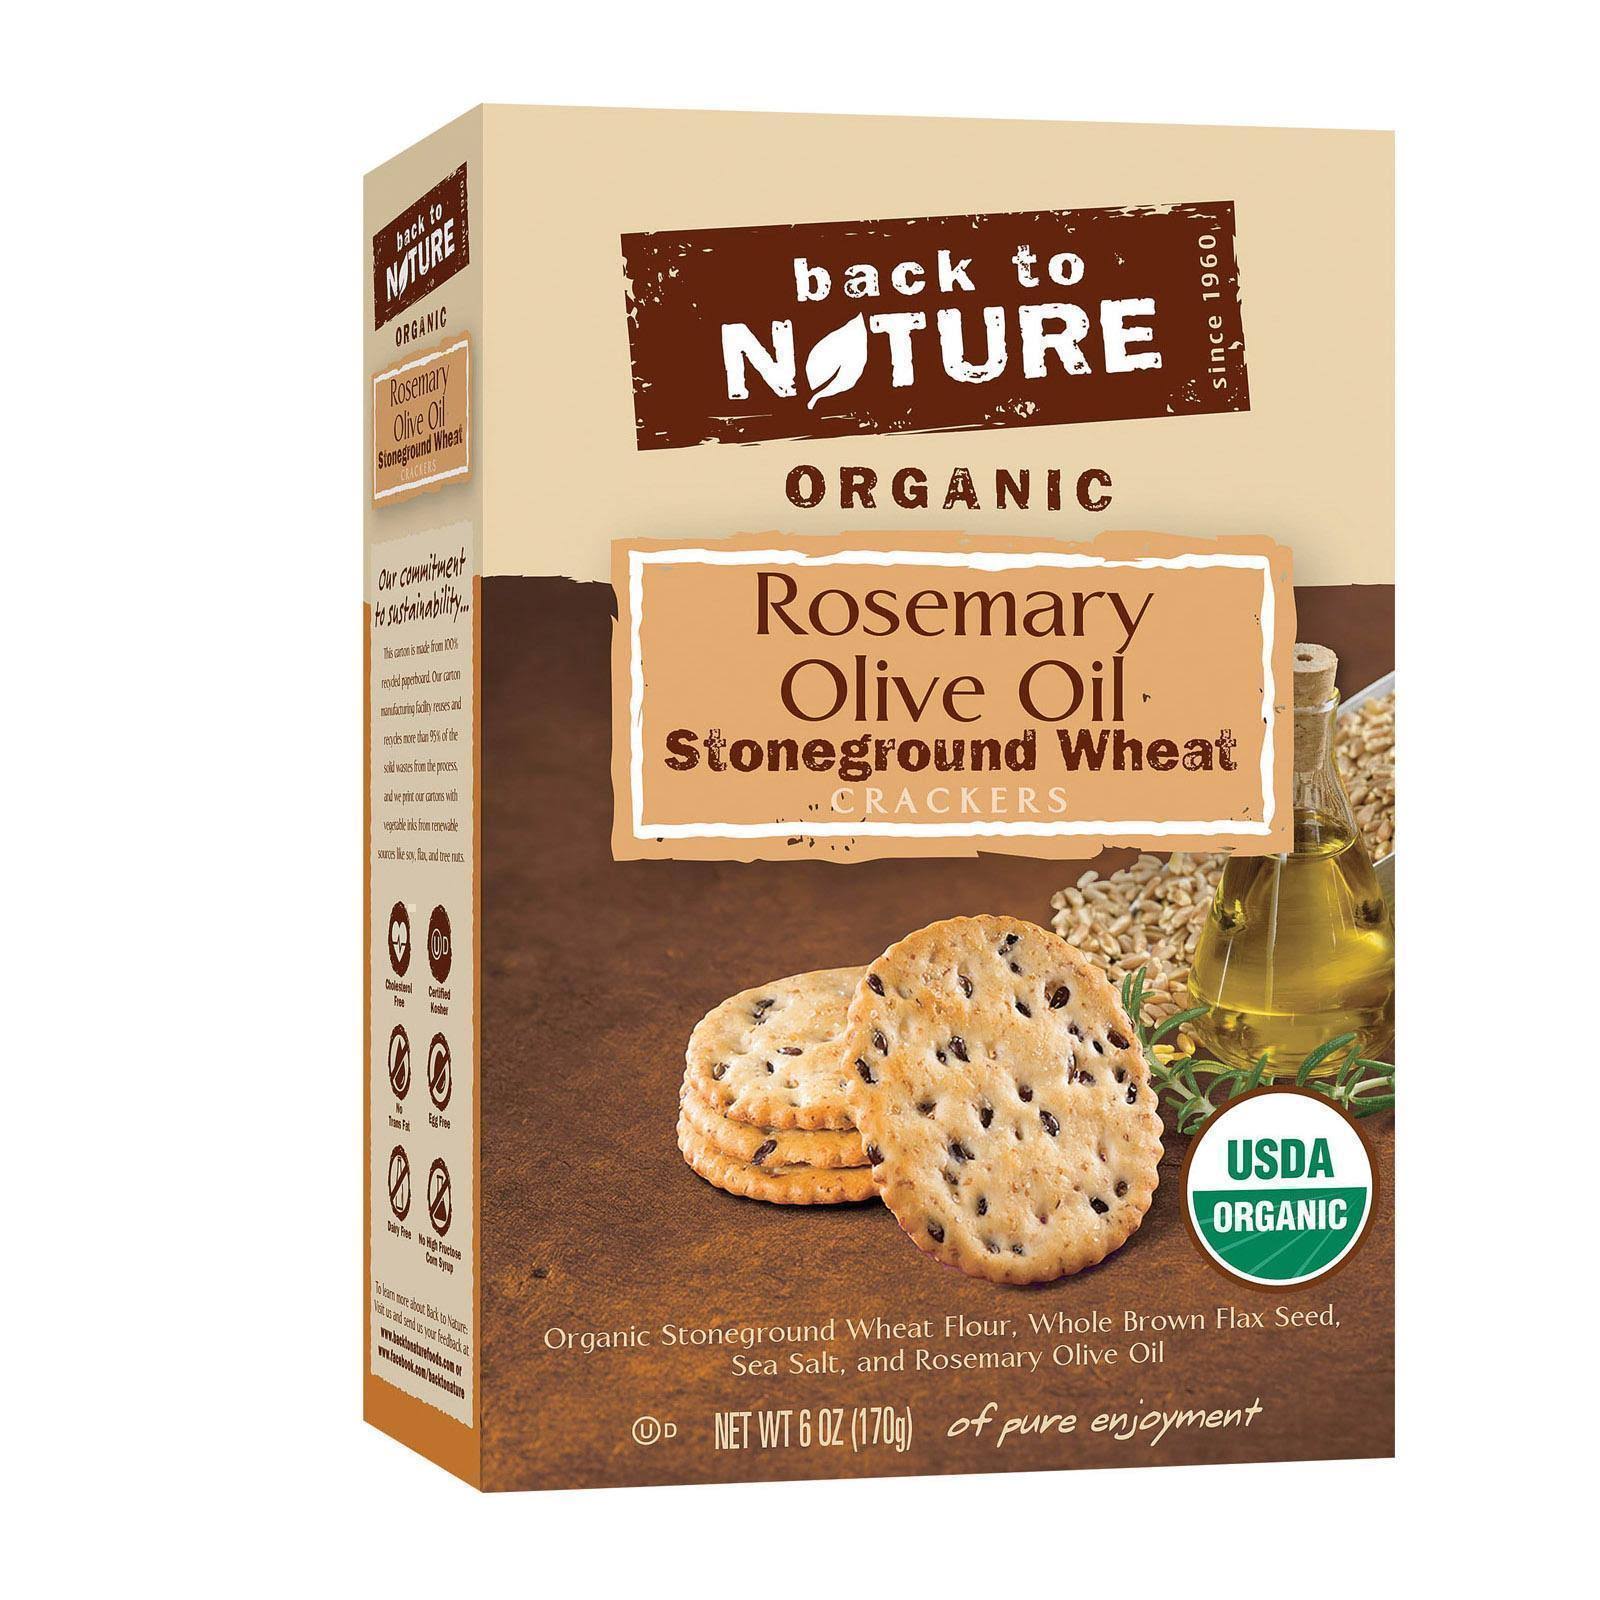 Back To Nature Organic Stoneground Wheat Crackers - Rosemary & Olive Oil, 170g